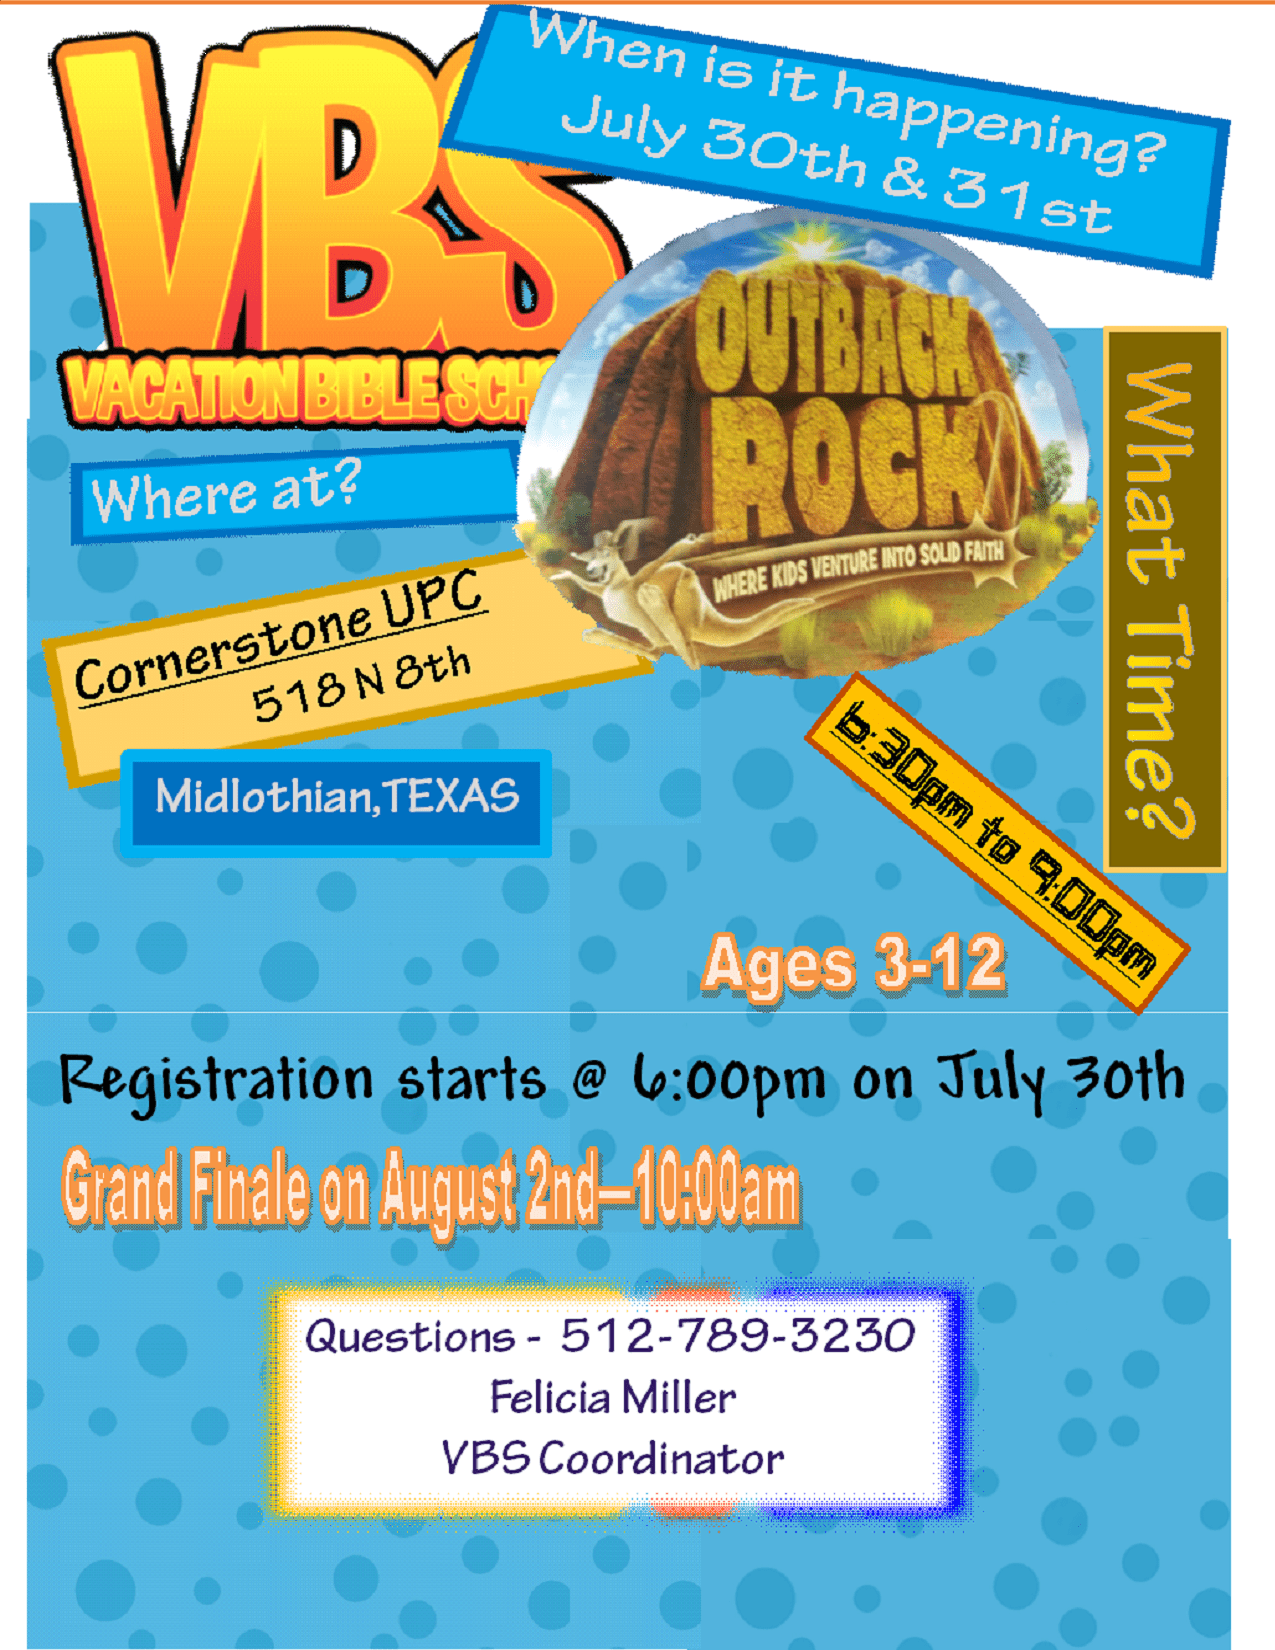 Outback Rock Weekend Vbs 2015